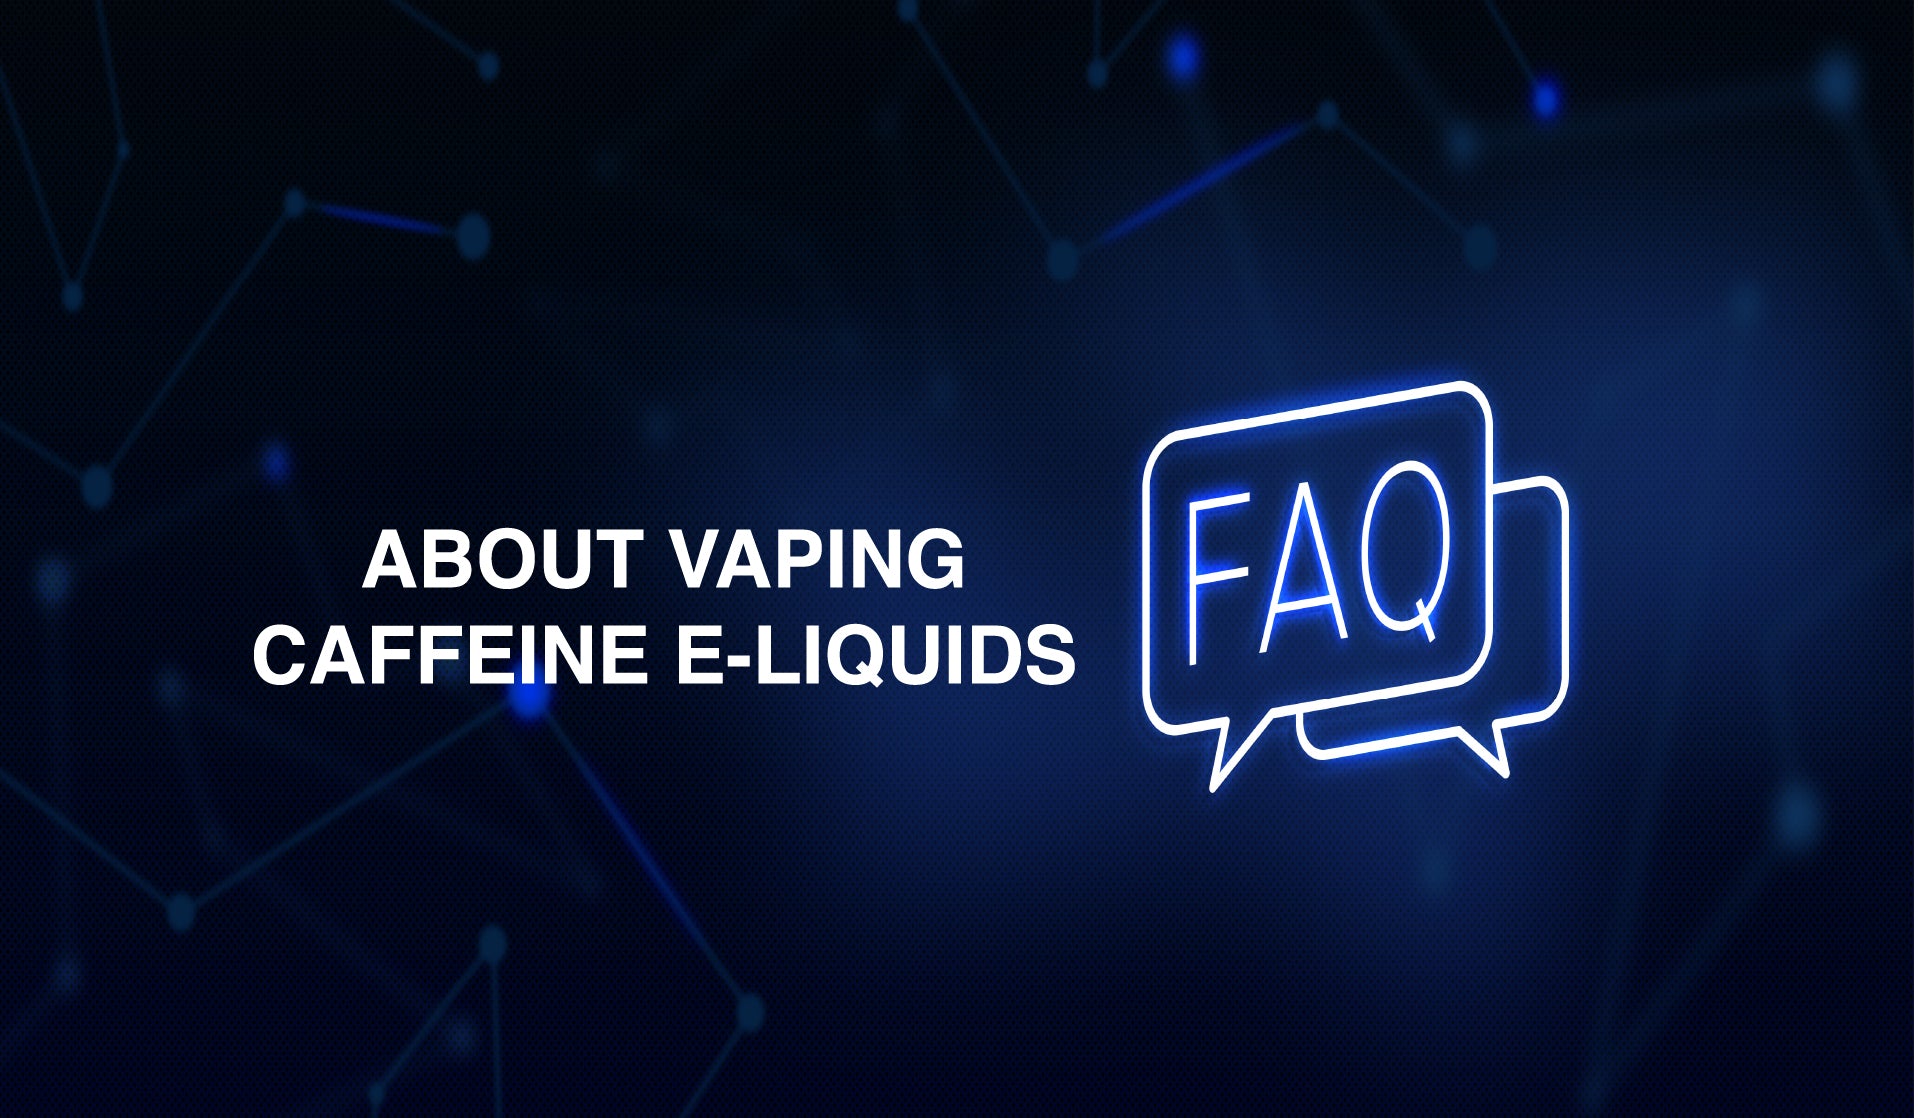 Is it Legal to sell and buy caffeine vape liquid in the UK?